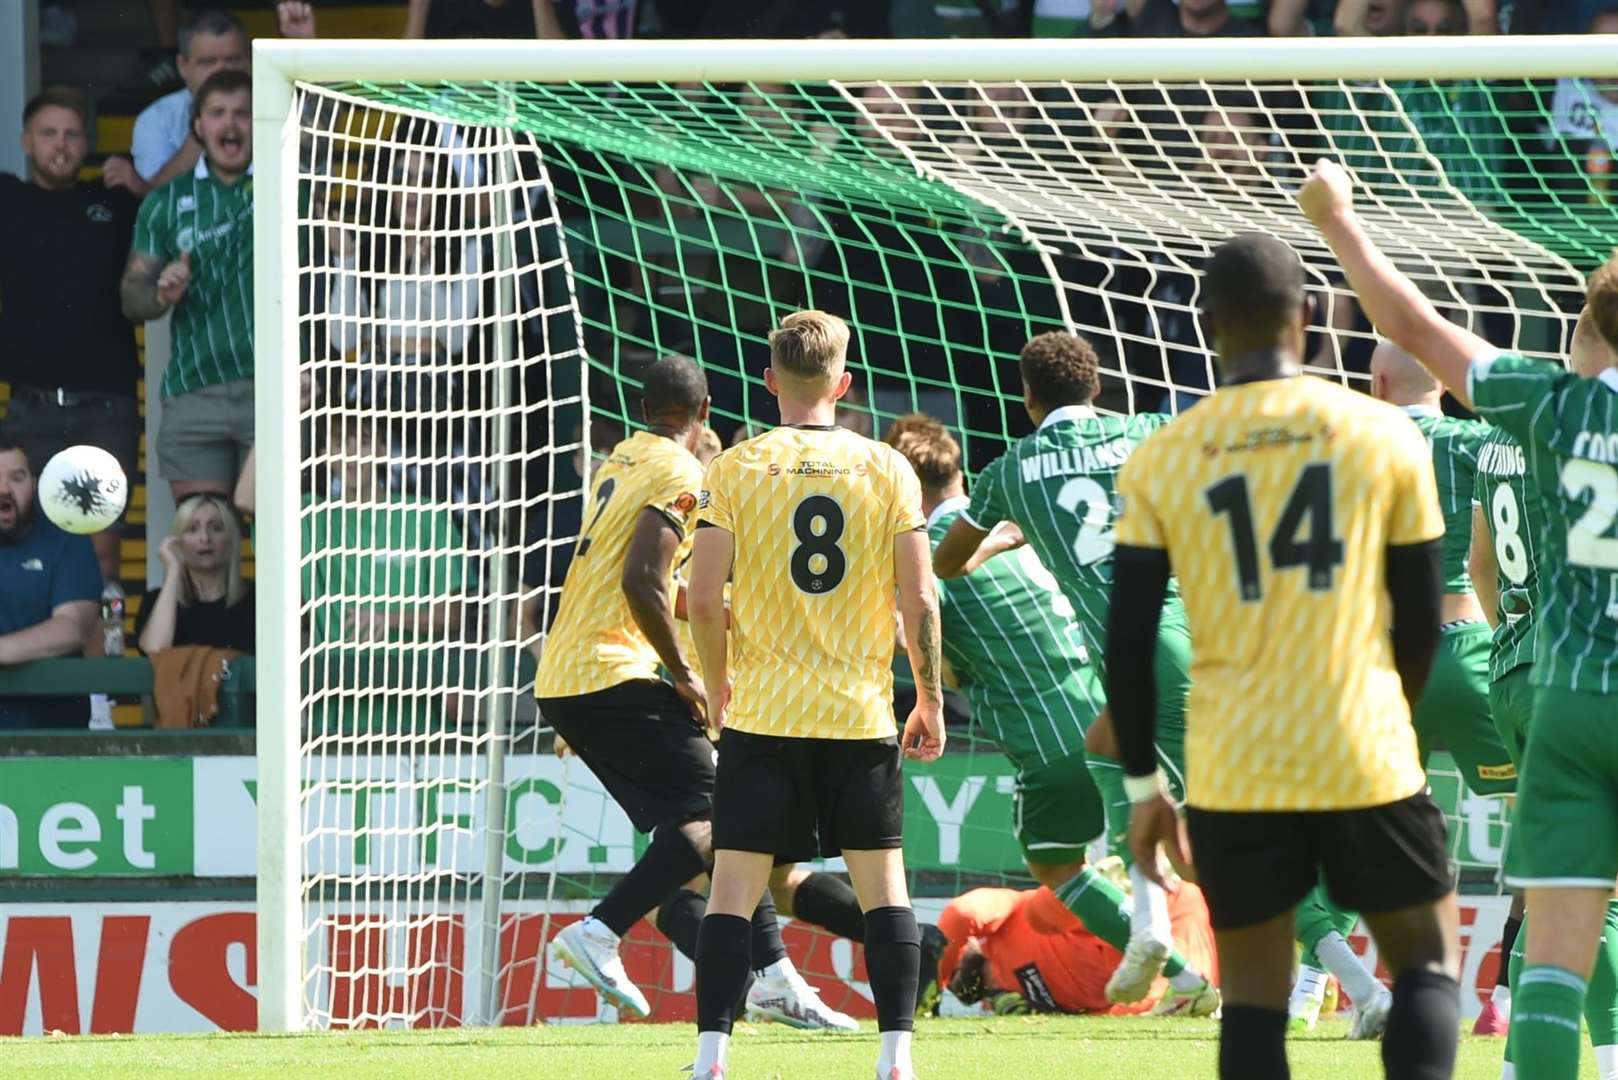 Lucas Covolan pulls off a wonder save at Yeovil earlier this season. Picture: Steve Terrell